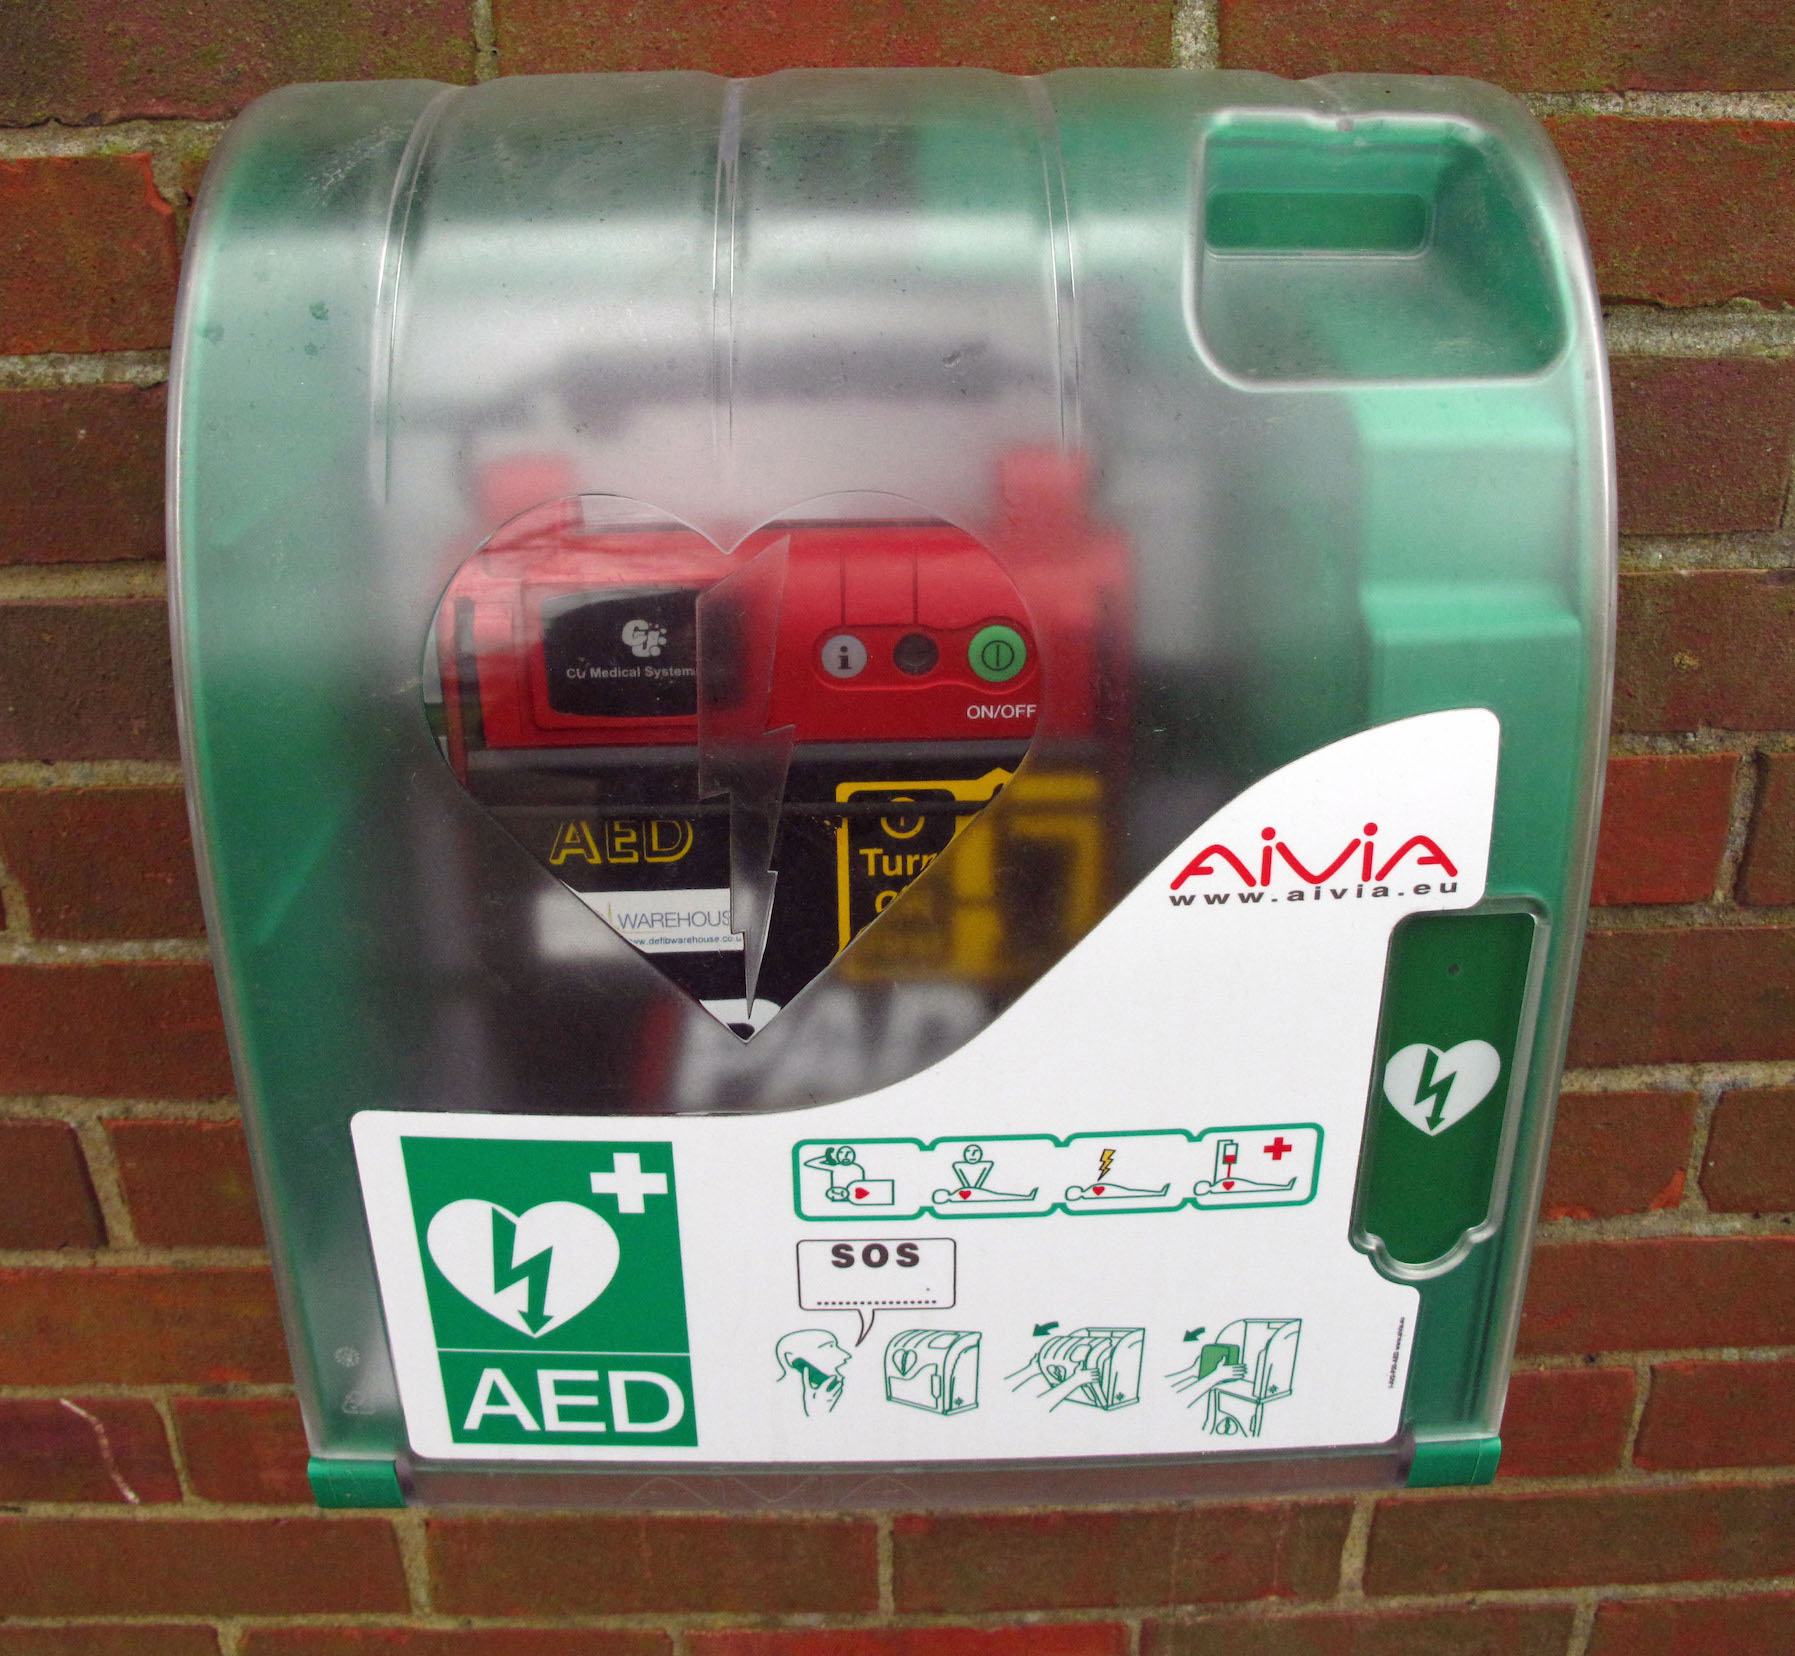 Public access automated external defibrillator (AED)